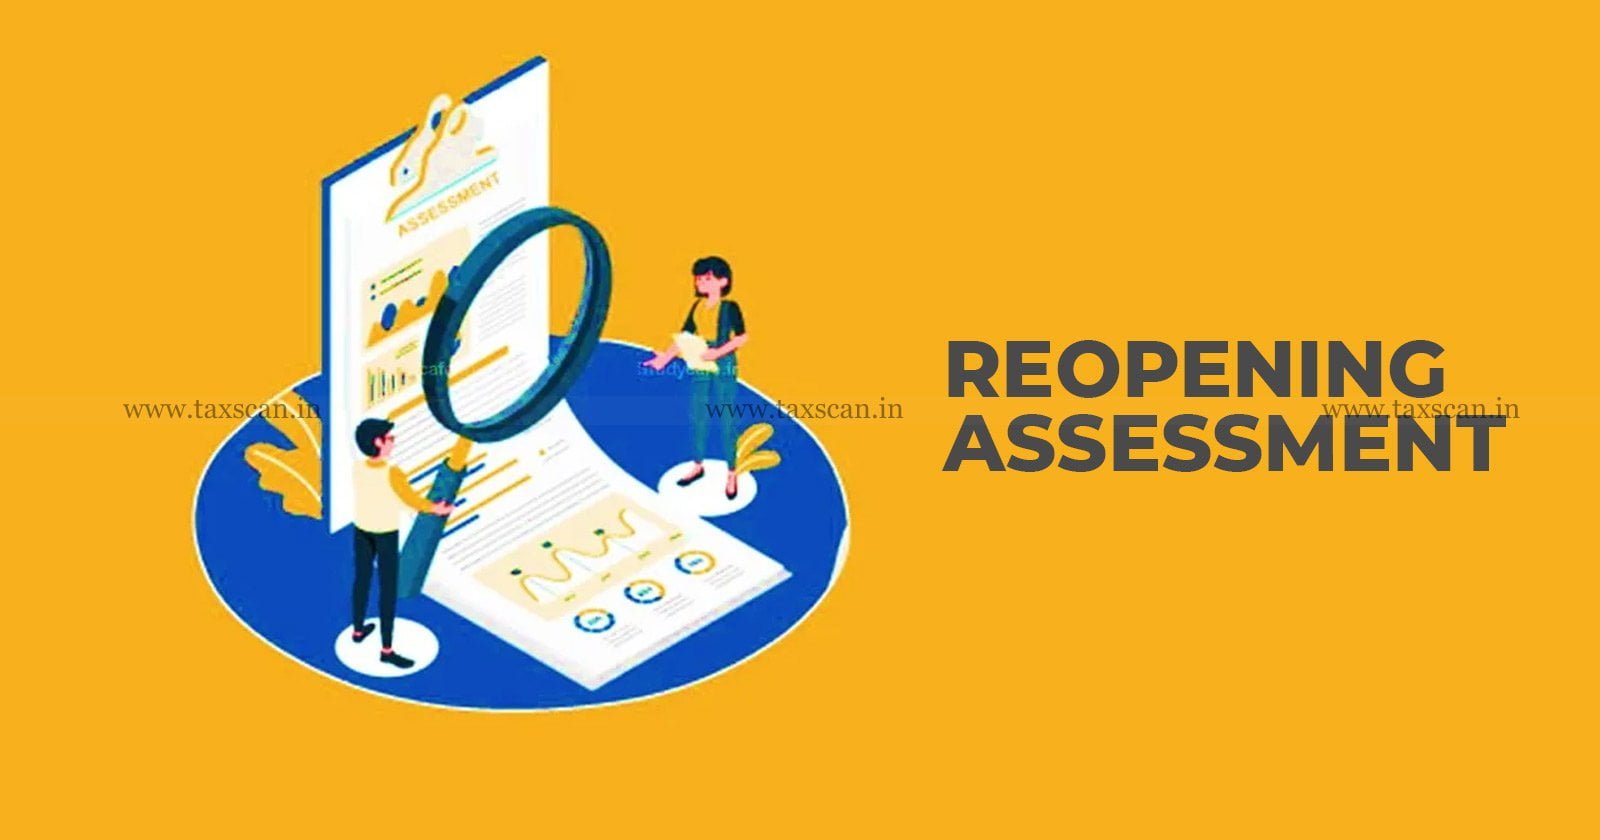 Reopening of Assessment Transfer took place on Account of JDA entered Group of Assessee ITAT - TAXSCAN